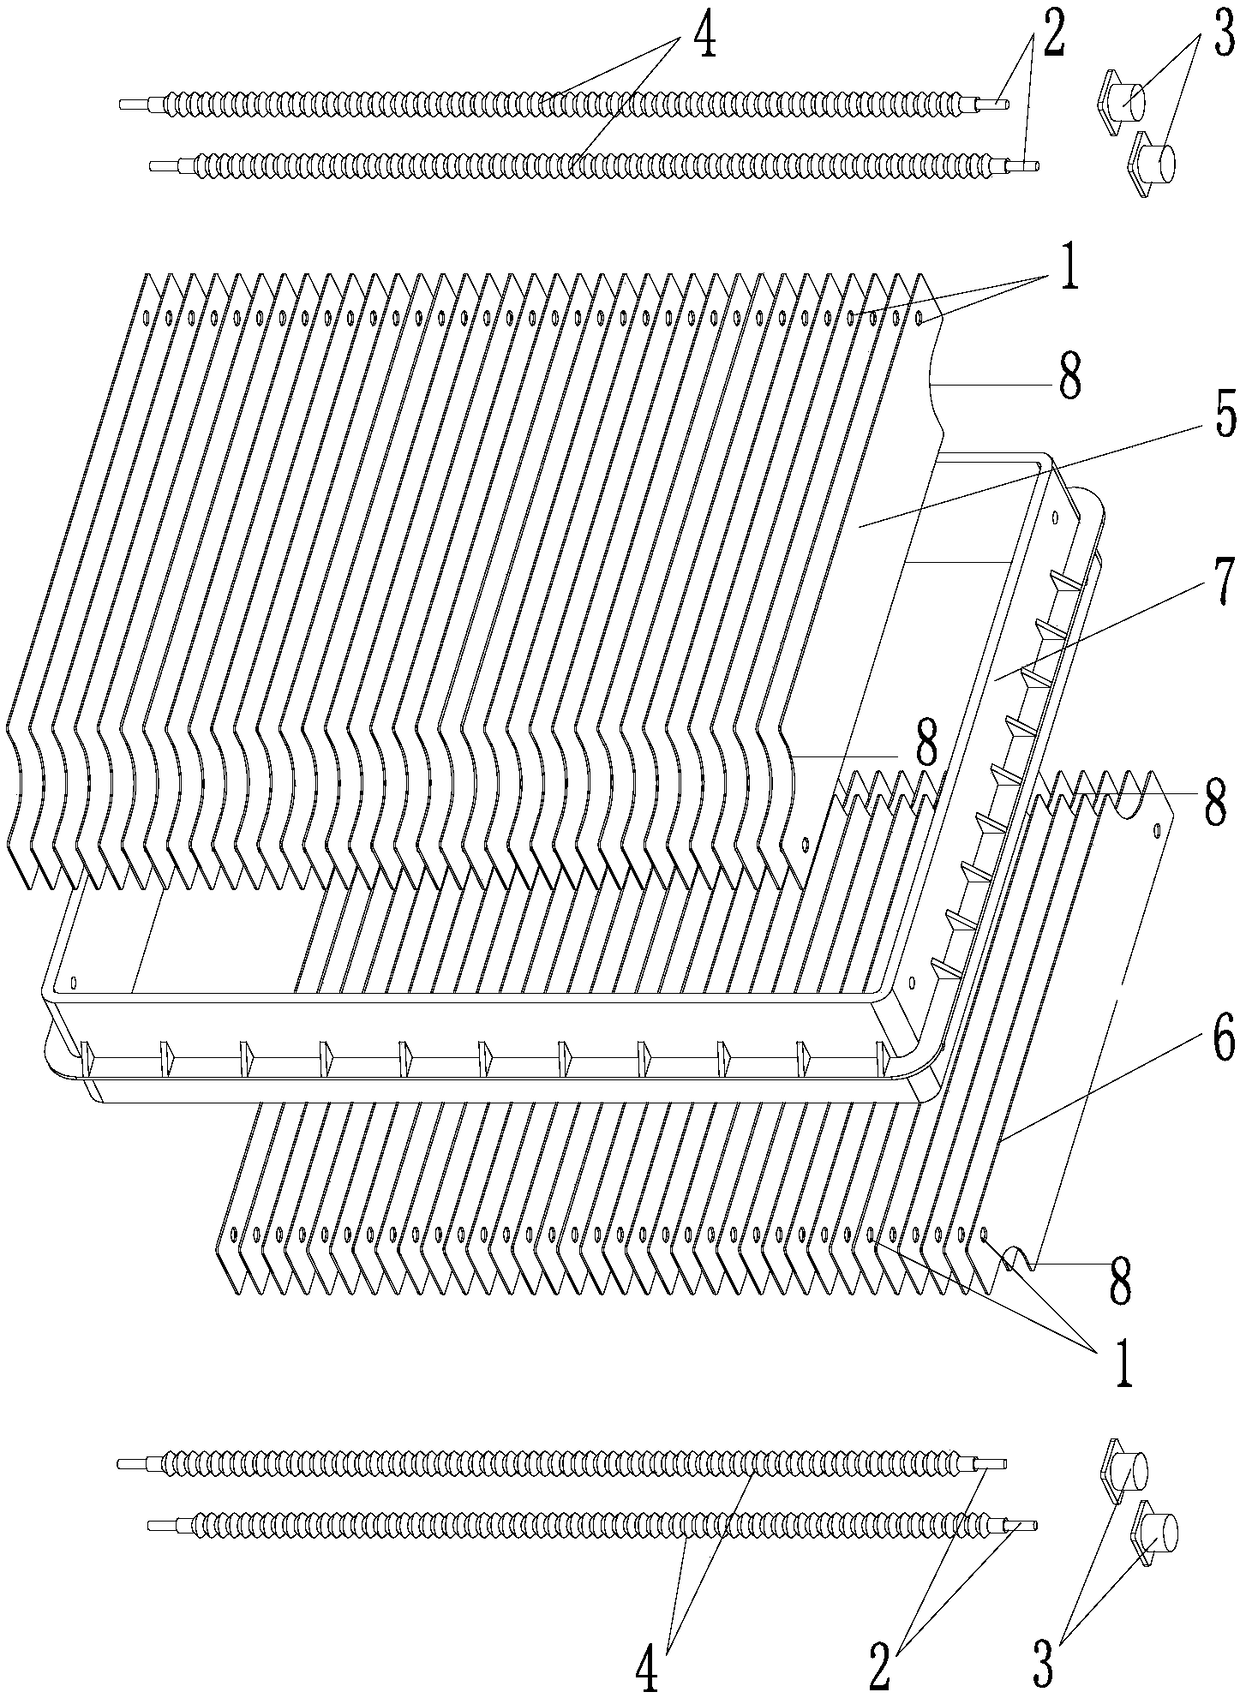 Electrode plate assemblies, electrostatic devices and range hoods